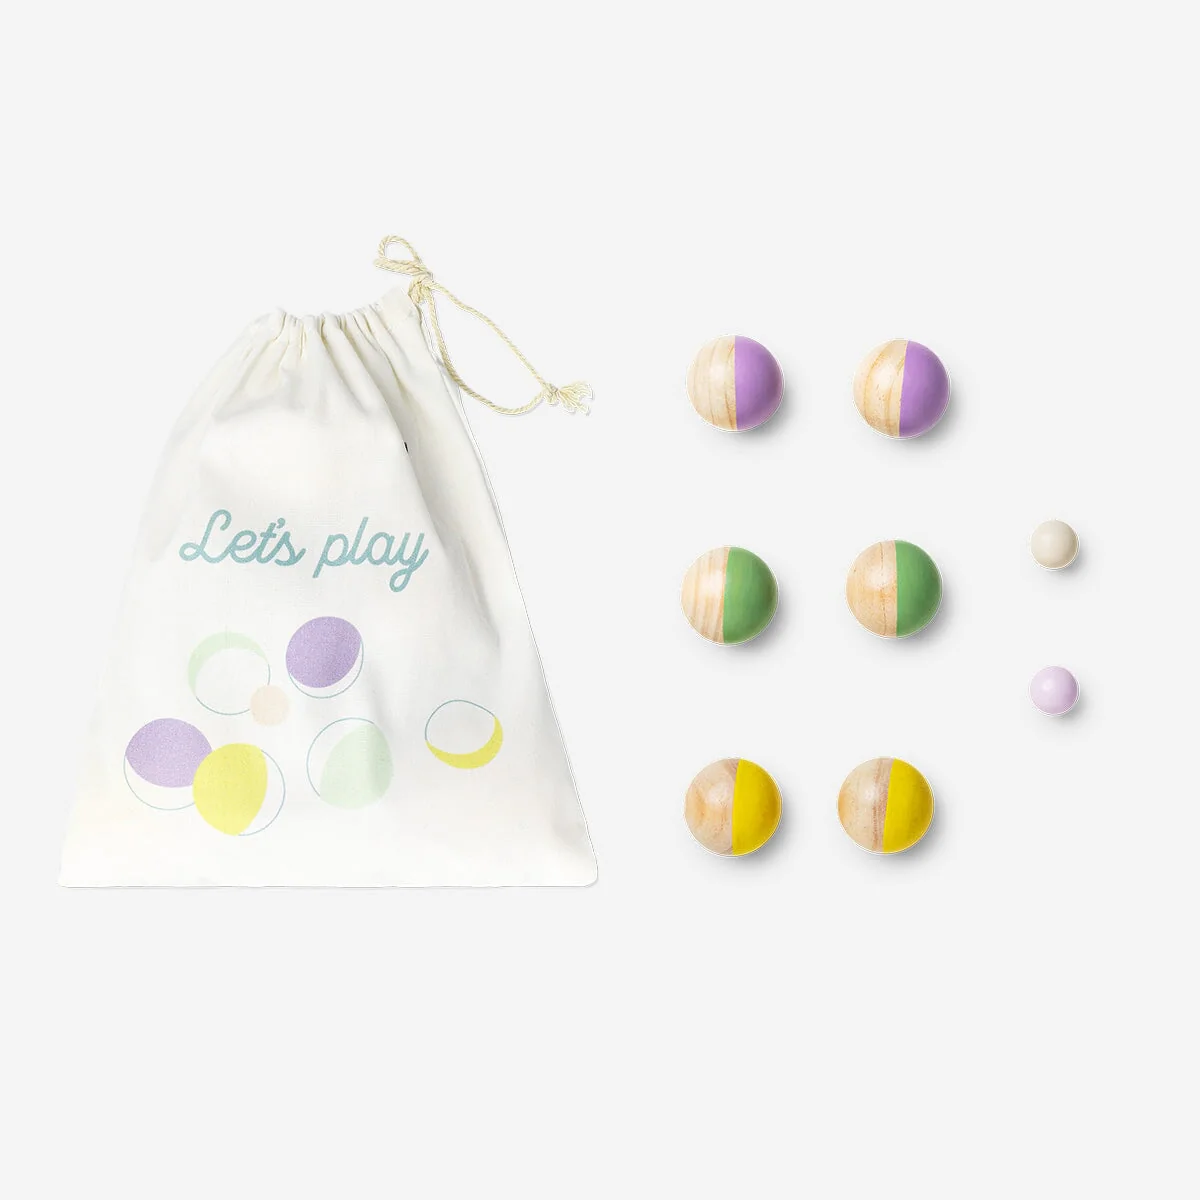 Colorful wooden petanque balls in a white drawstring bag with 'Let's Play' text, set on a light background.